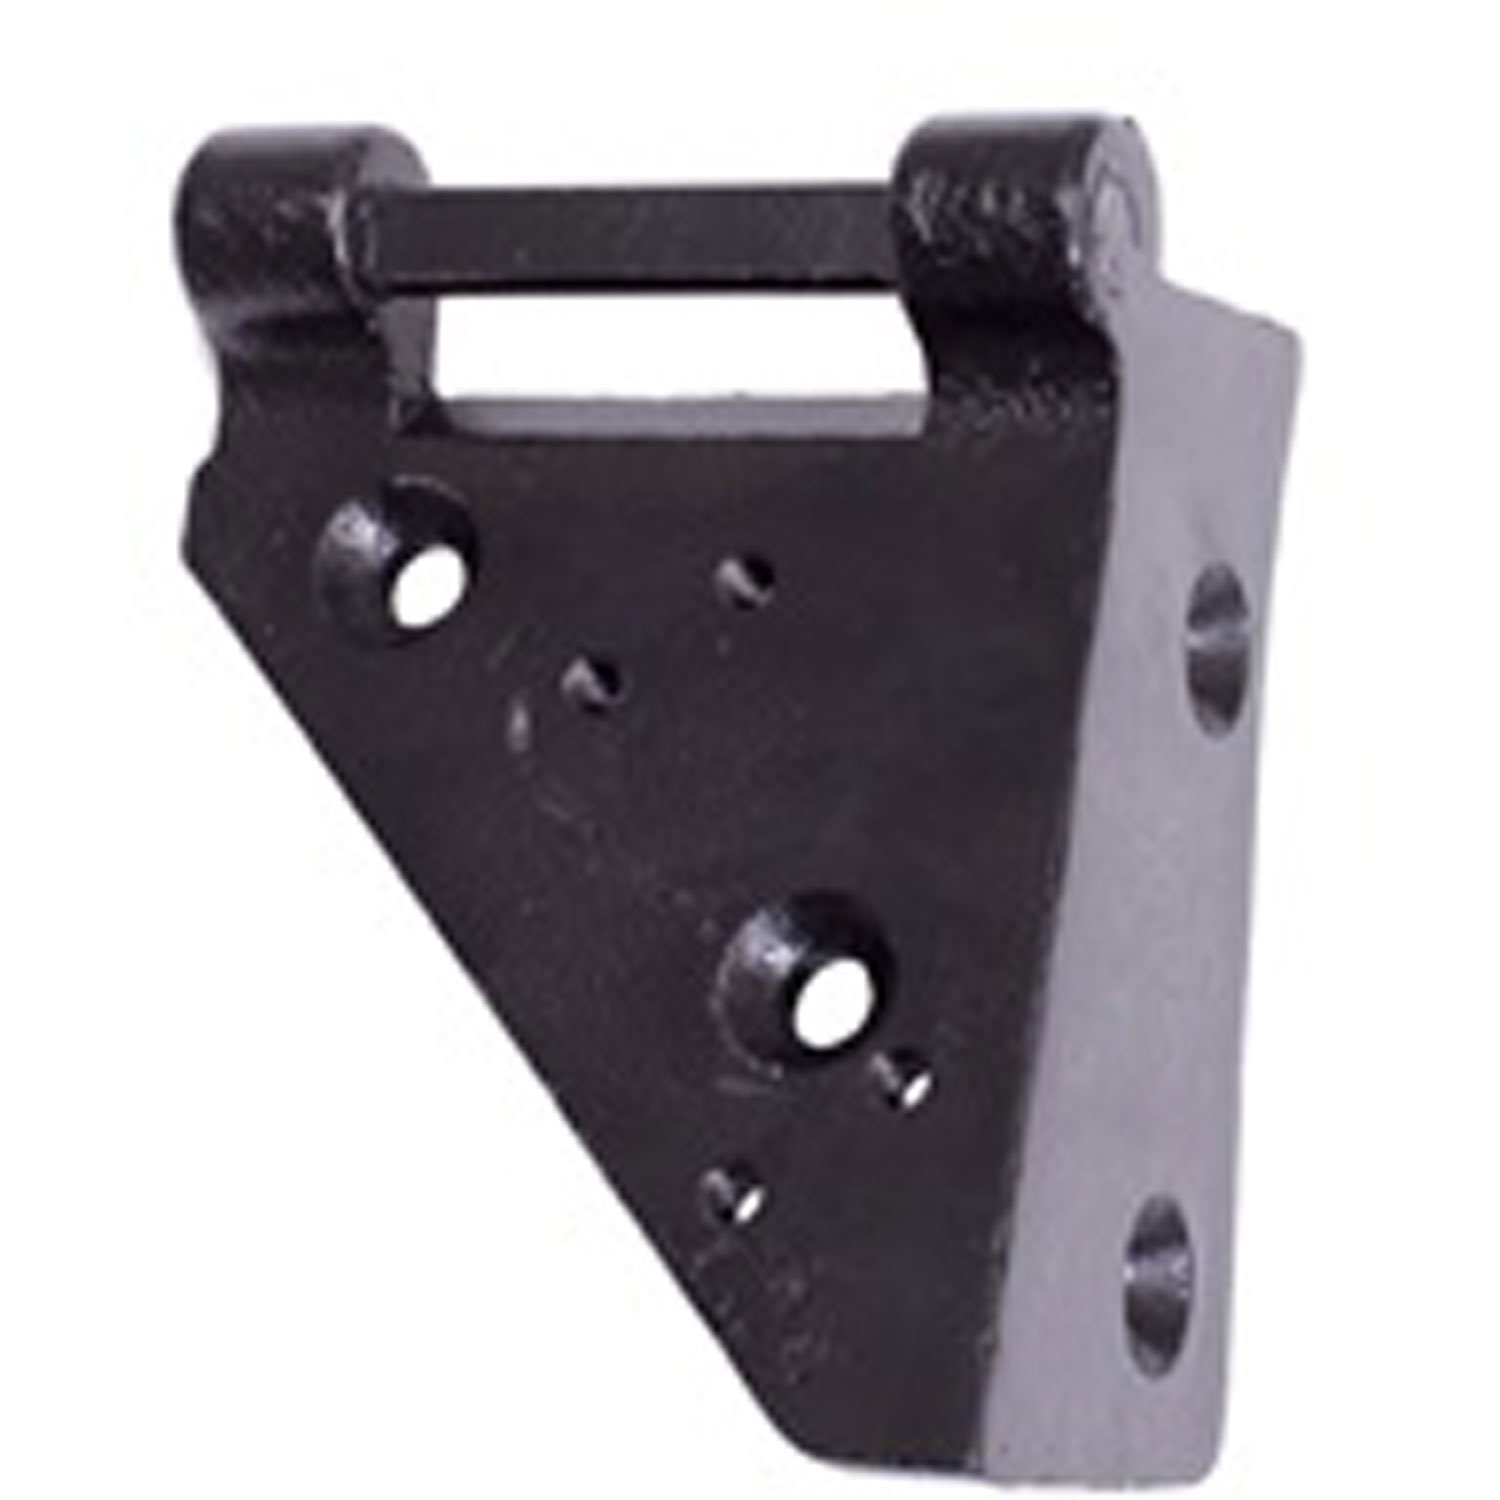 lower left replacement windshield hinge from Omix-ADA, Fits 52-75 Willys and Jeep models